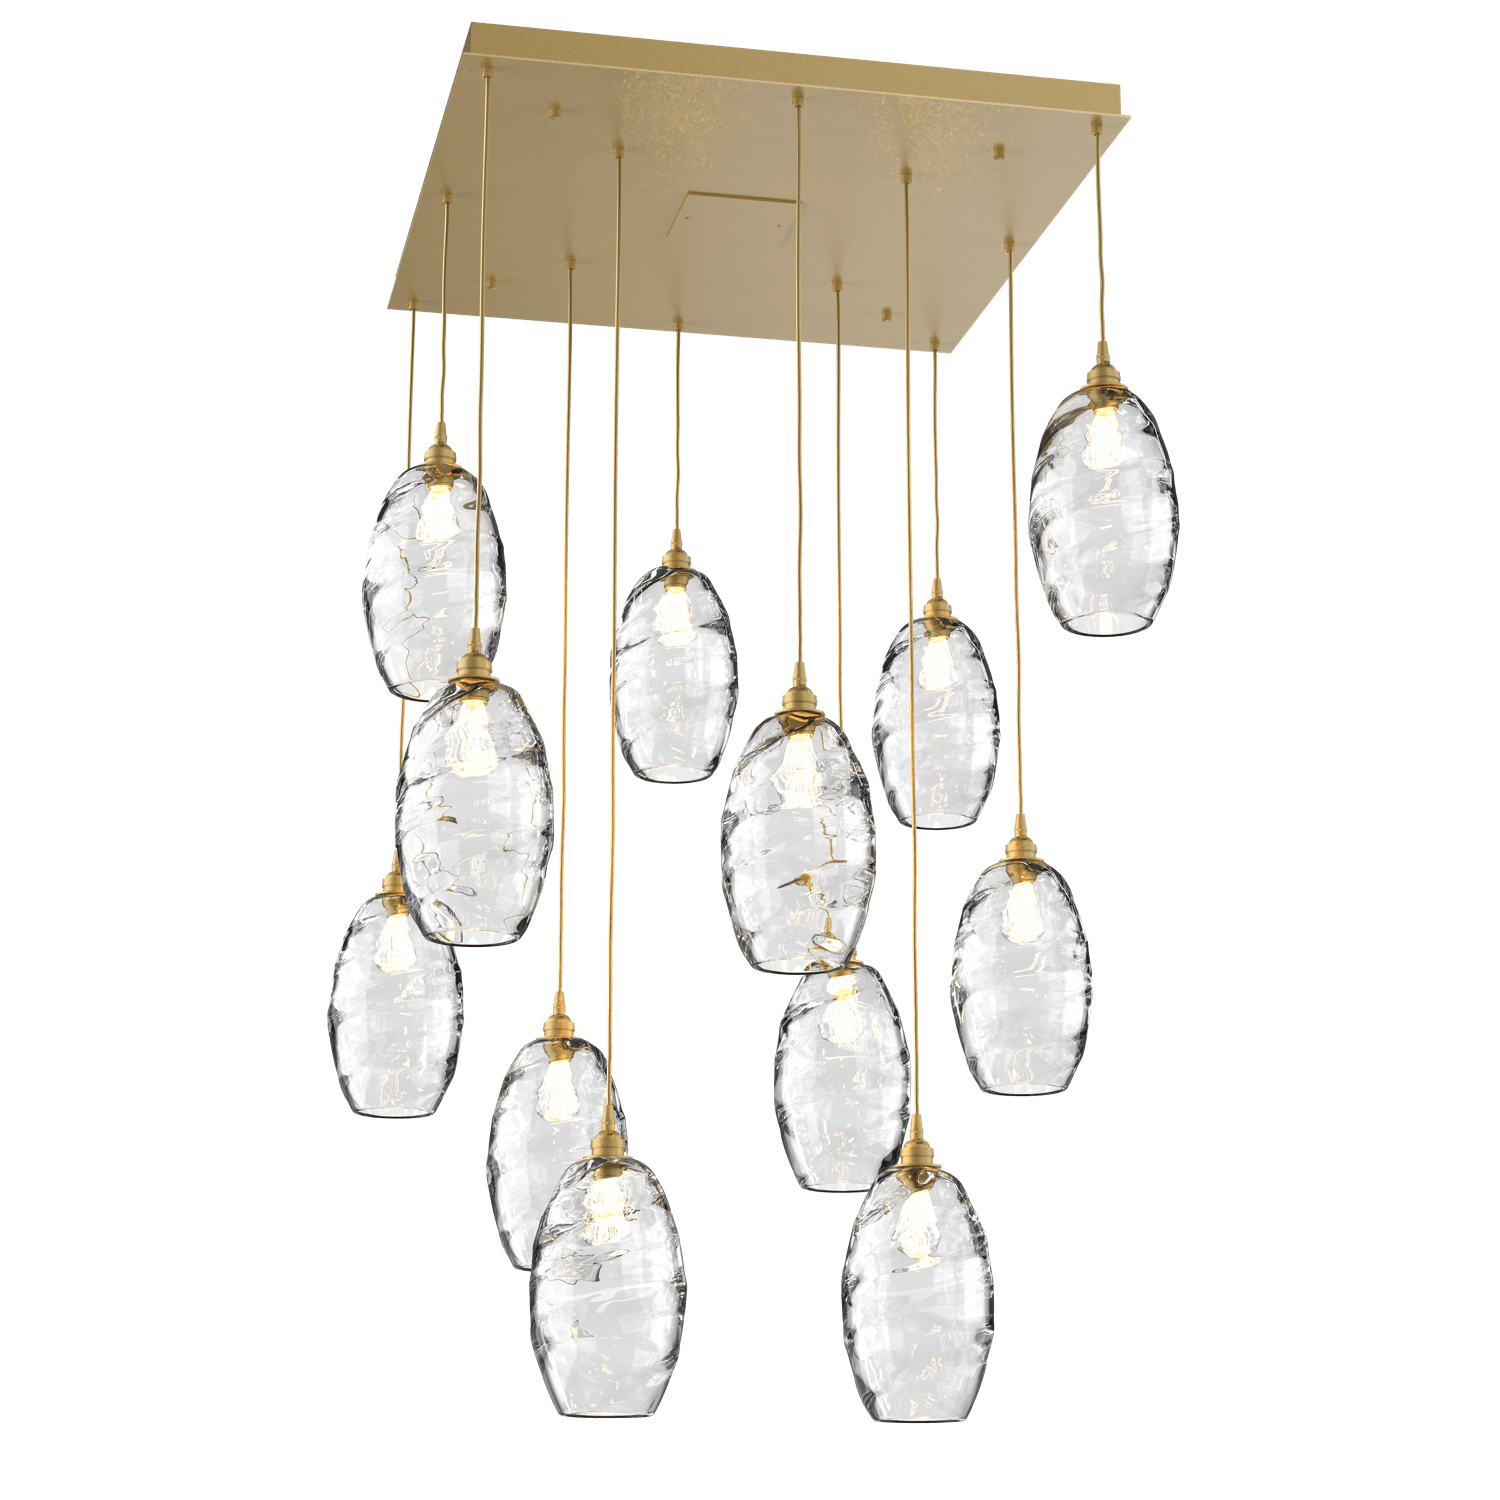 CHB0035-12-GB-OC-Hammerton-Studio-Optic-Blown-Glass-Elisse-12-light-square-pendant-chandelier-with-gilded-brass-finish-and-optic-clear-blown-glass-shades-and-incandescent-lamping